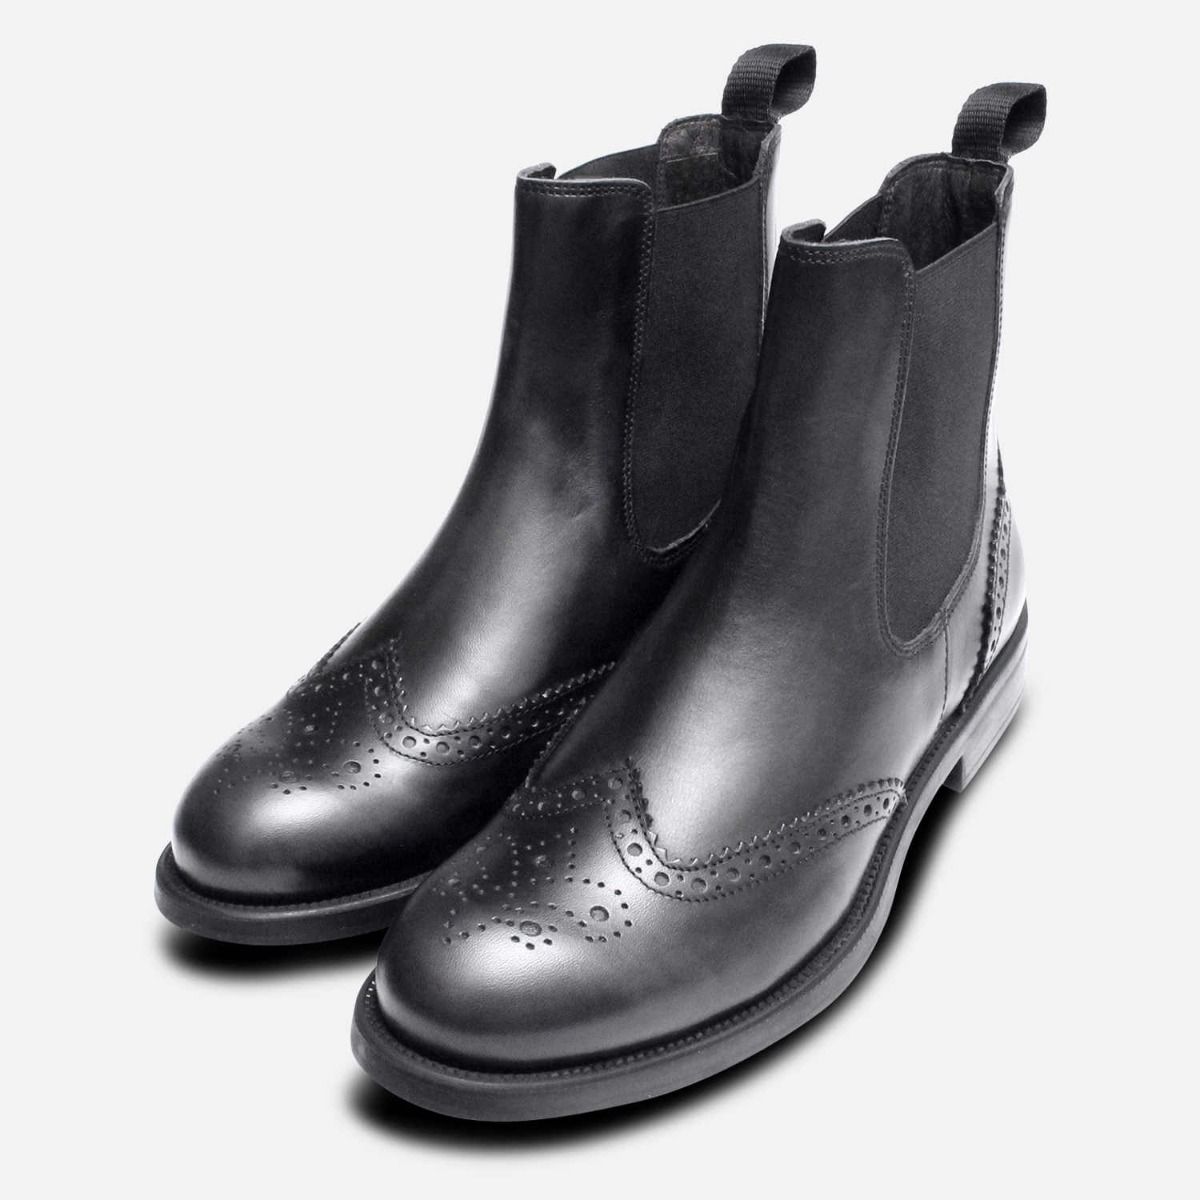 made in italy chelsea boots